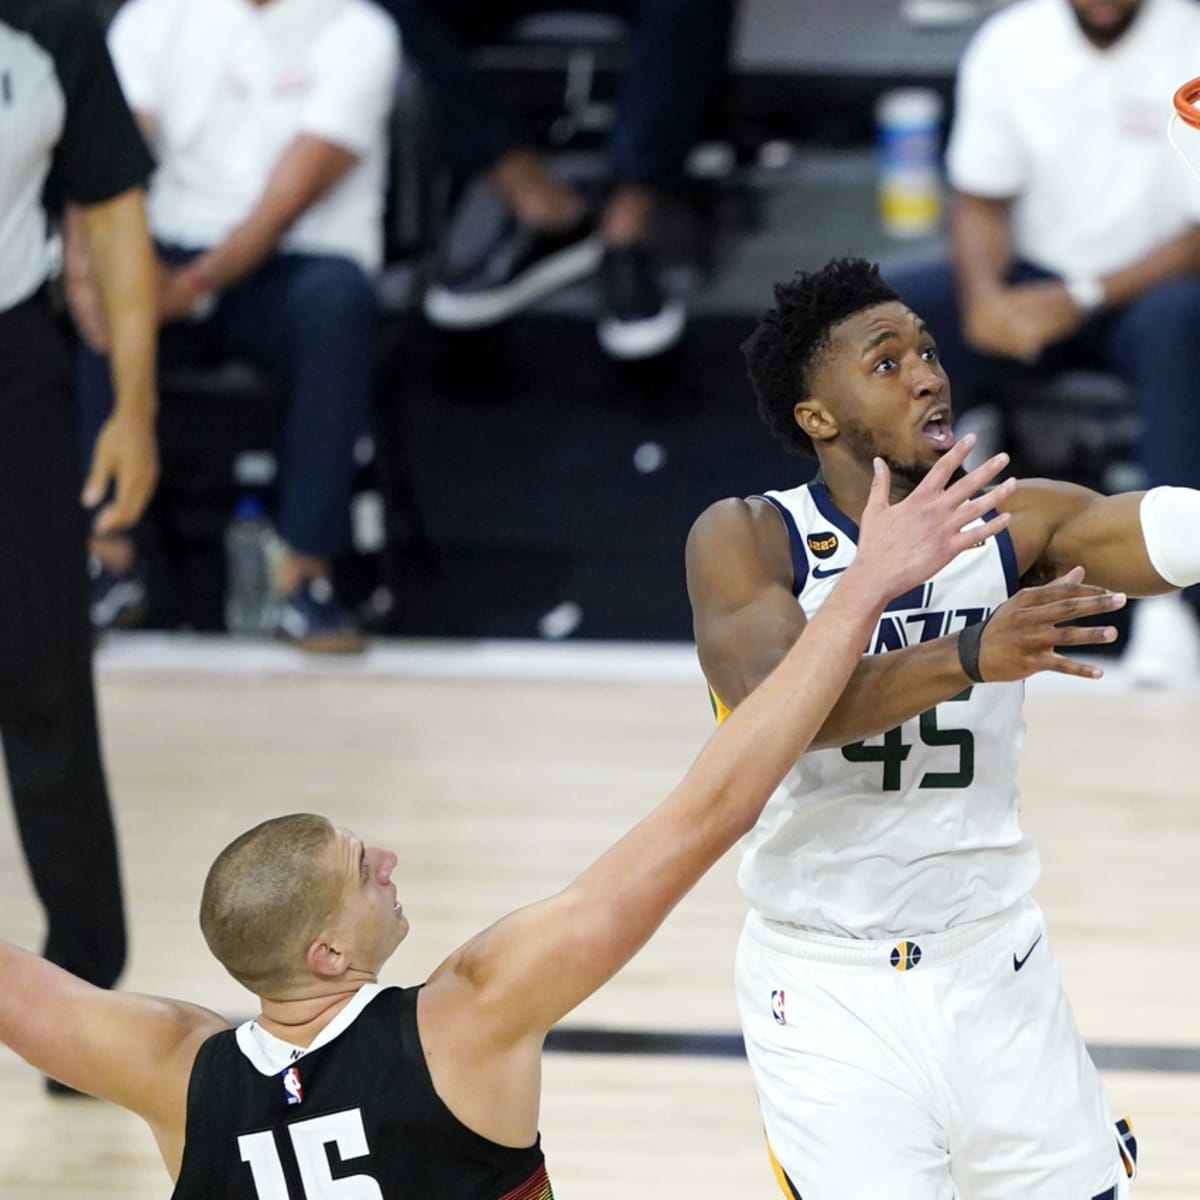 Donovan Mitchell drops career-high 57 points in 2020 playoff debut